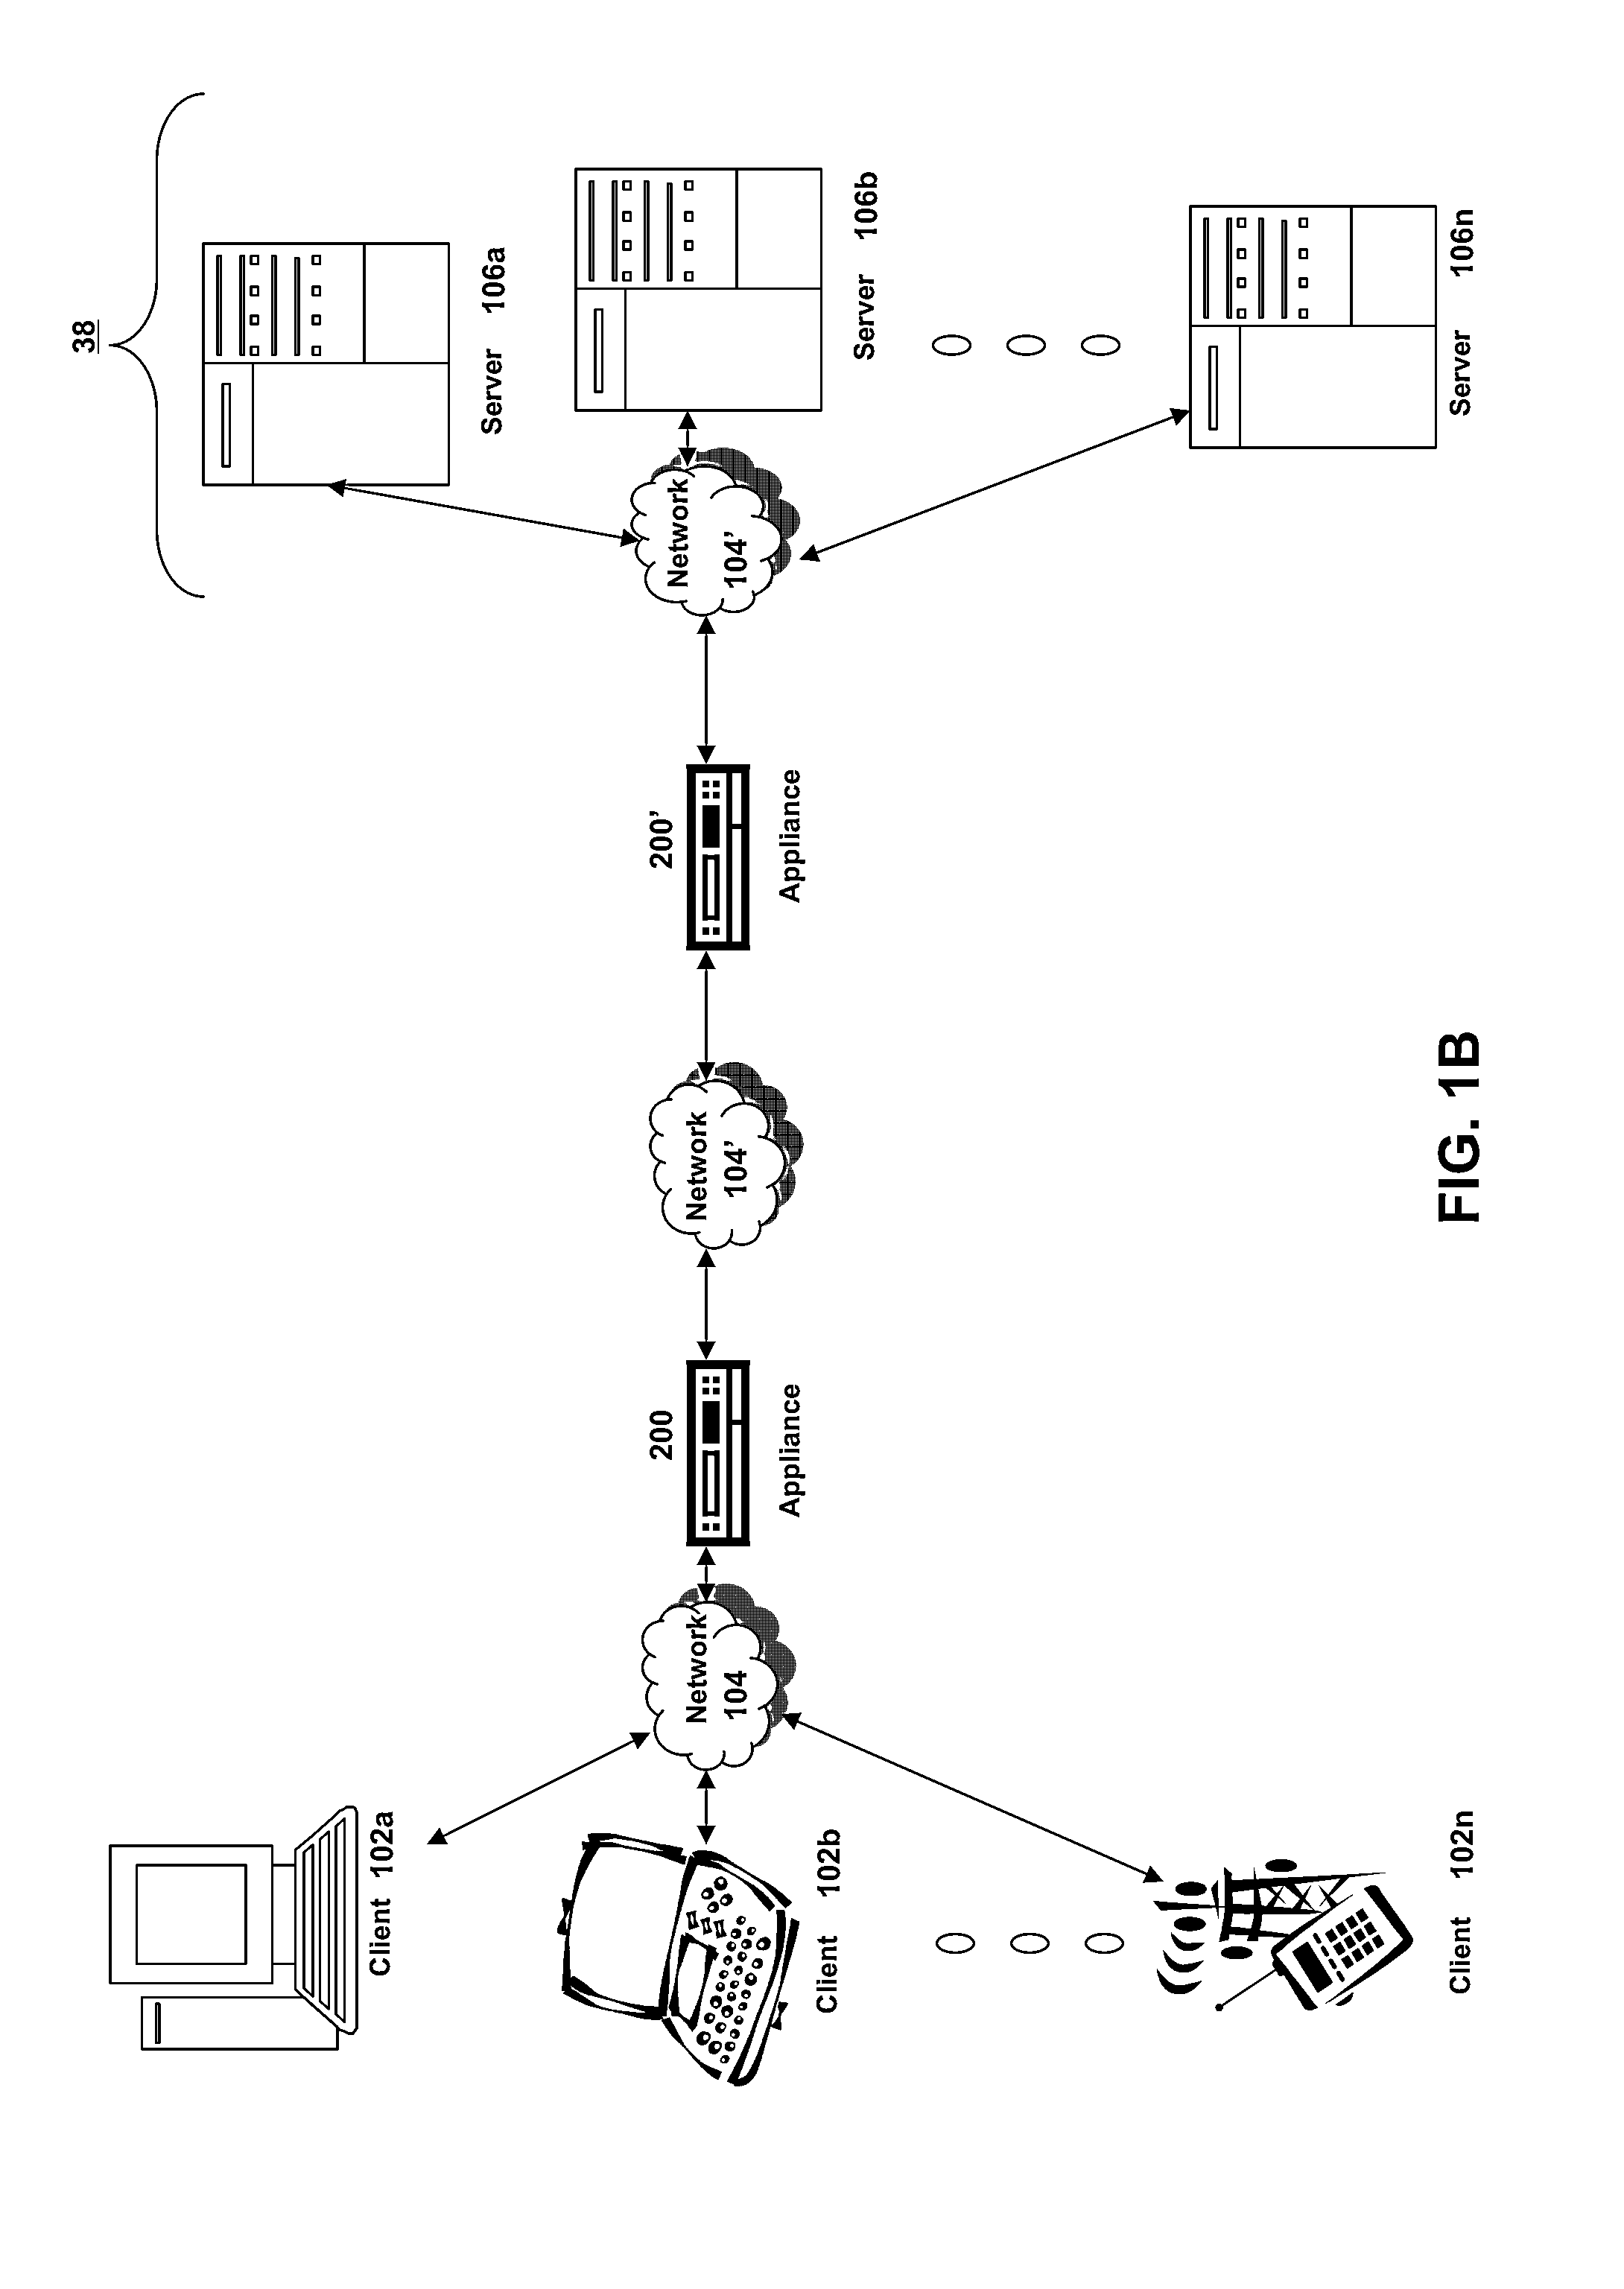 Systems and methods for synchronizing mss and pmtu in ncore and cluster systems